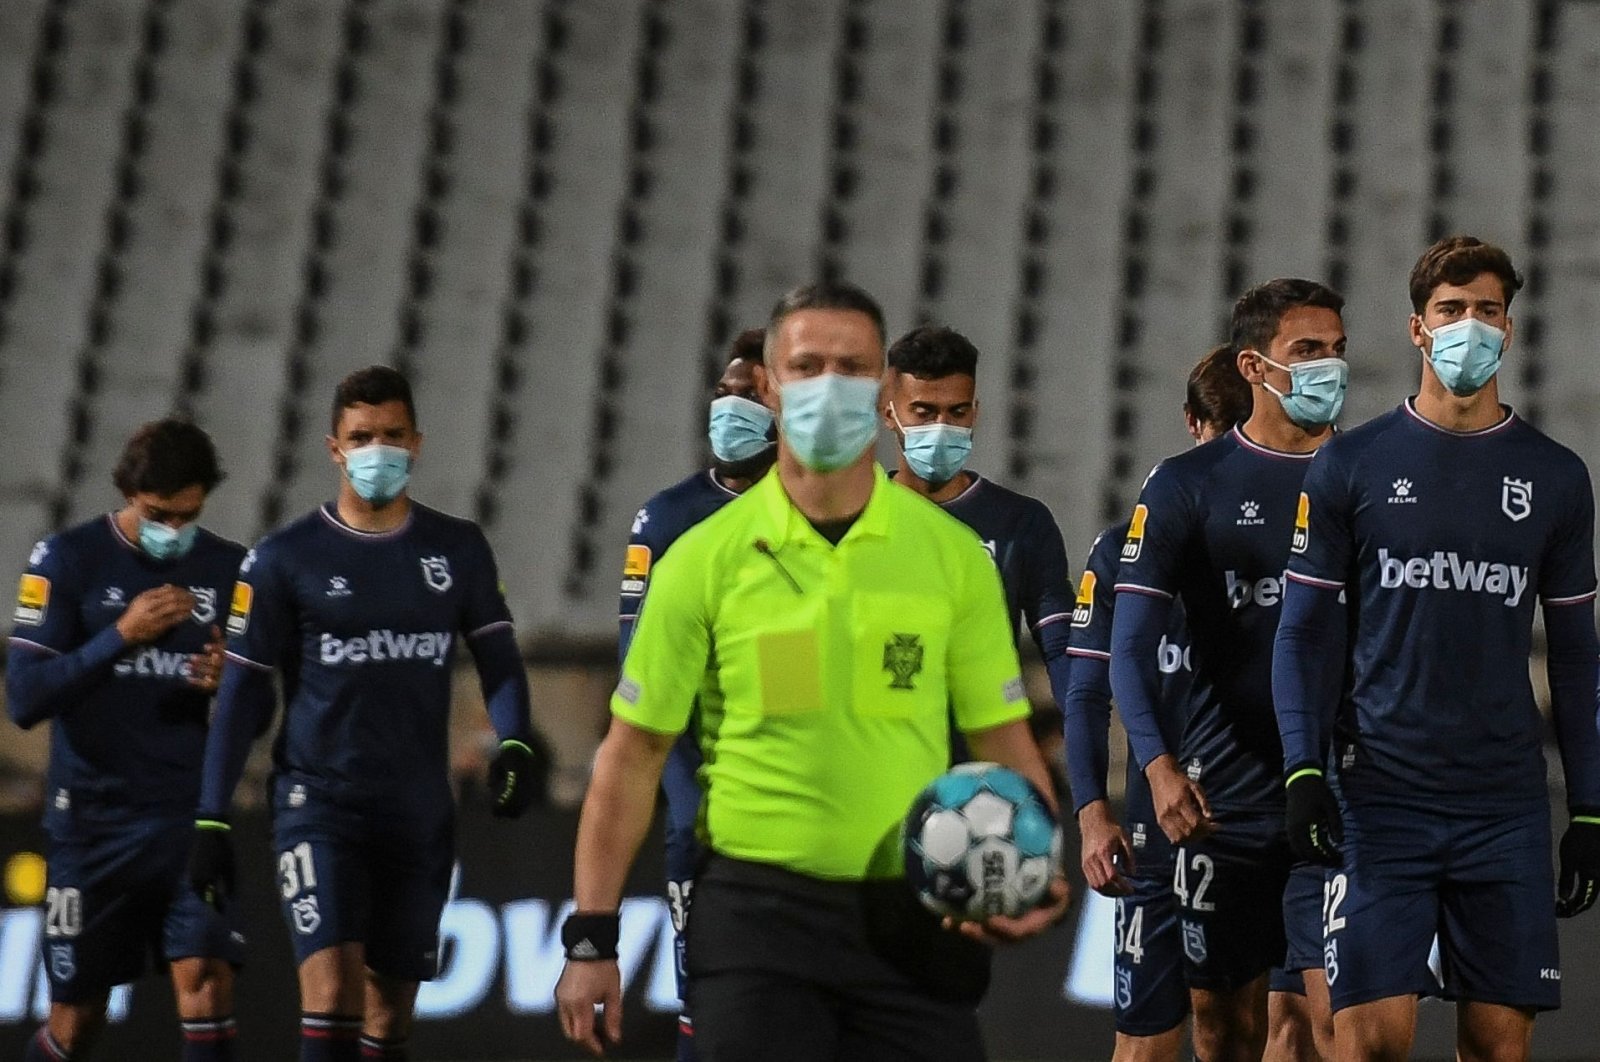 Belenenses players arrive at the pitch before a Portuguese league match against Benfica Oeiras, Portugal, Nov, 27, 2021. (AFP Photo)